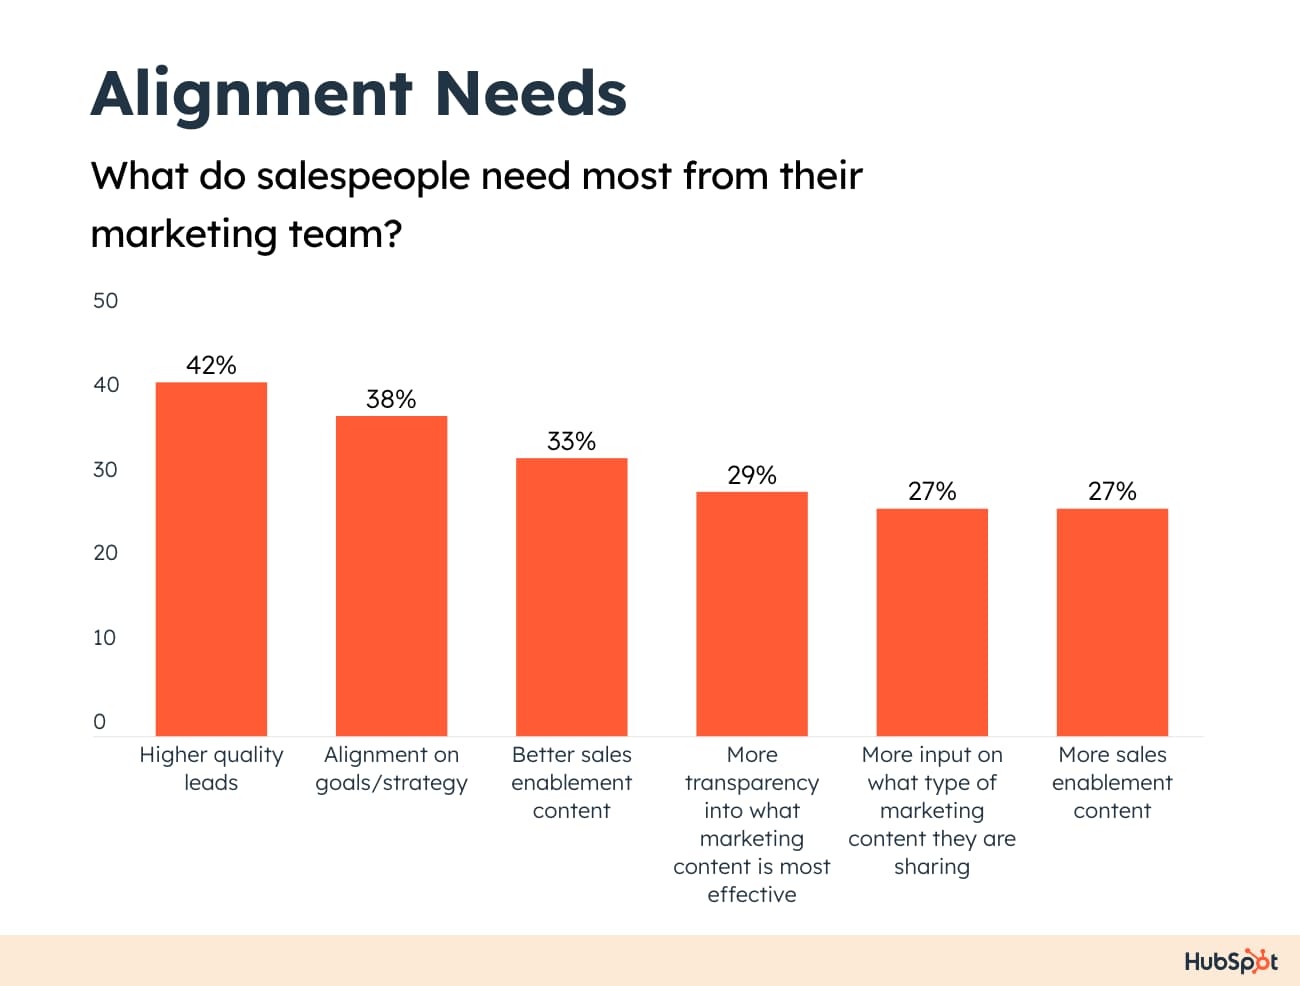 what do salespeople need most from their marketing team?